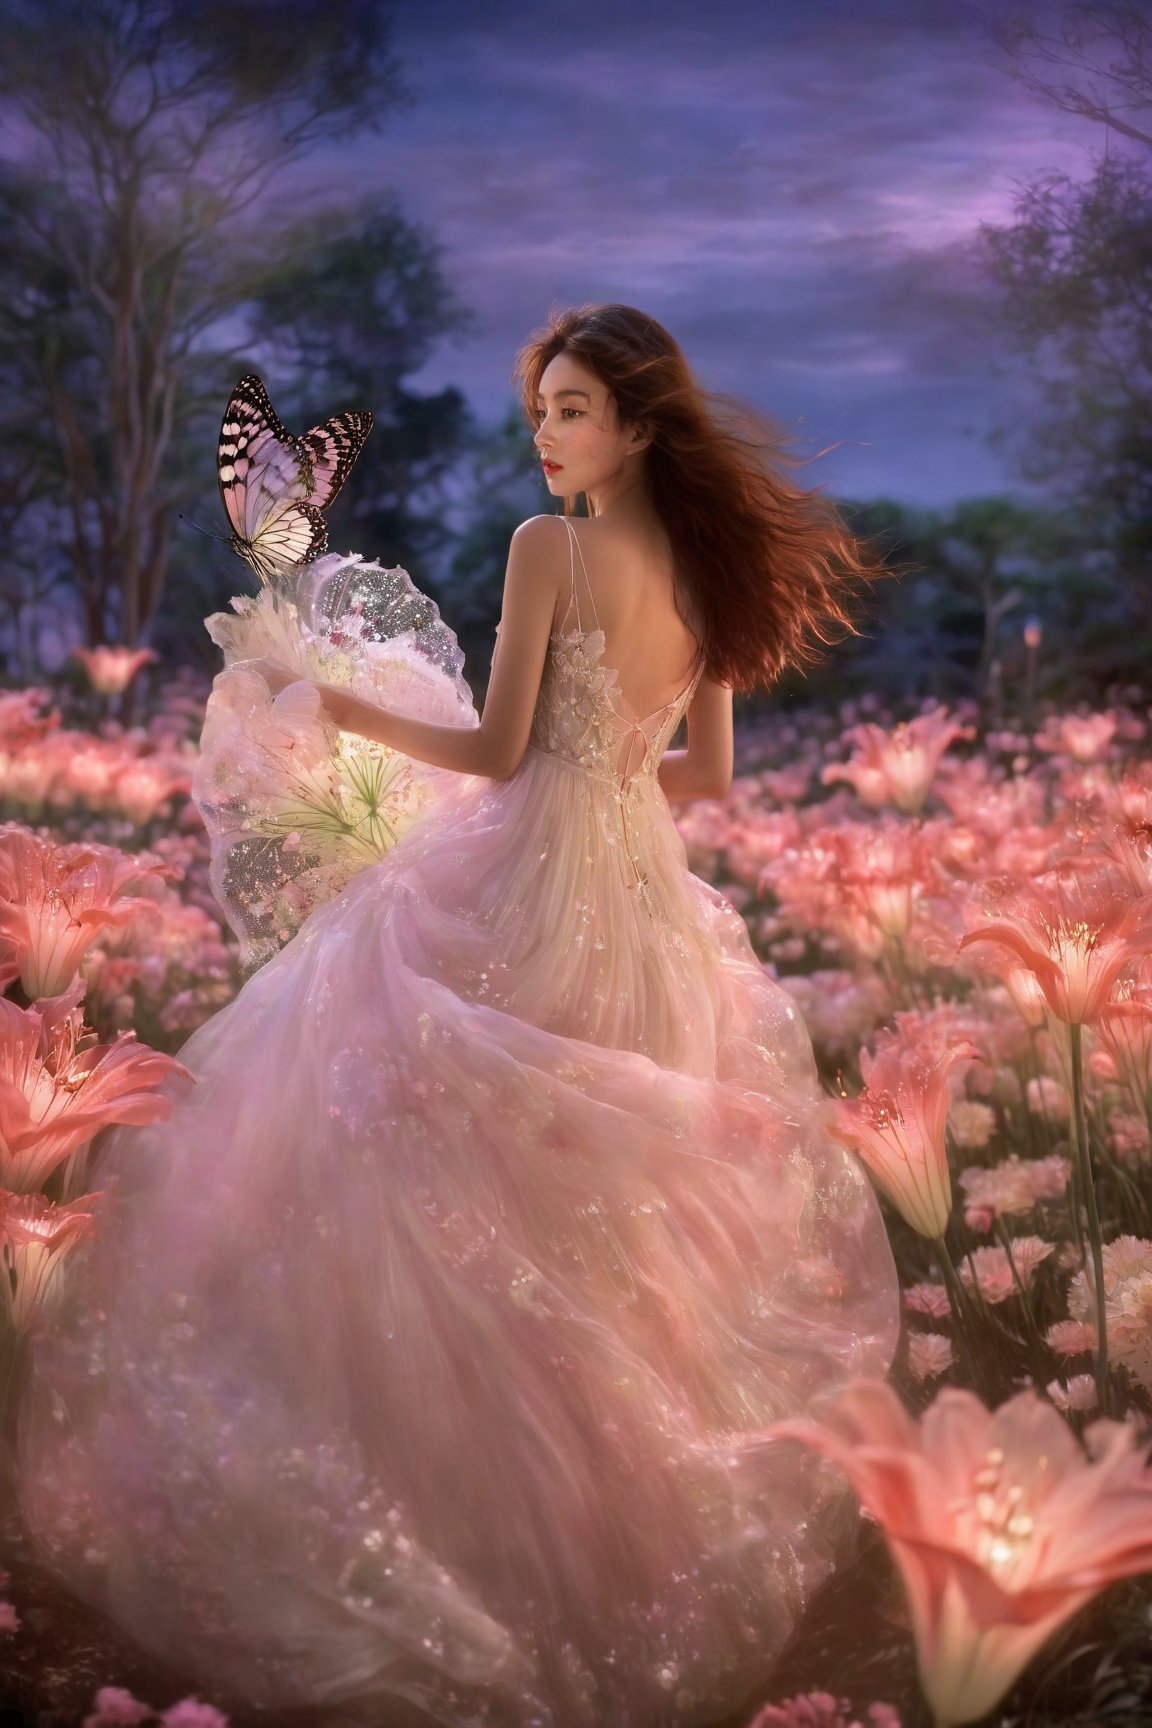 1girl, full body, high detailed, ultra realistic,  Bathed in ethereal moonlight, a figure stands amidst a field of spider lilies, their crimson whispers echoing the sorrow in their eyes. Butterflies, fragile yet determined, flutter around them, drawn to the moonlit beauty and silent lament. (Focus on melancholic ambiance, contrasting colors, and the butterfly's symbolic hope), Movie Still,Amethyst 